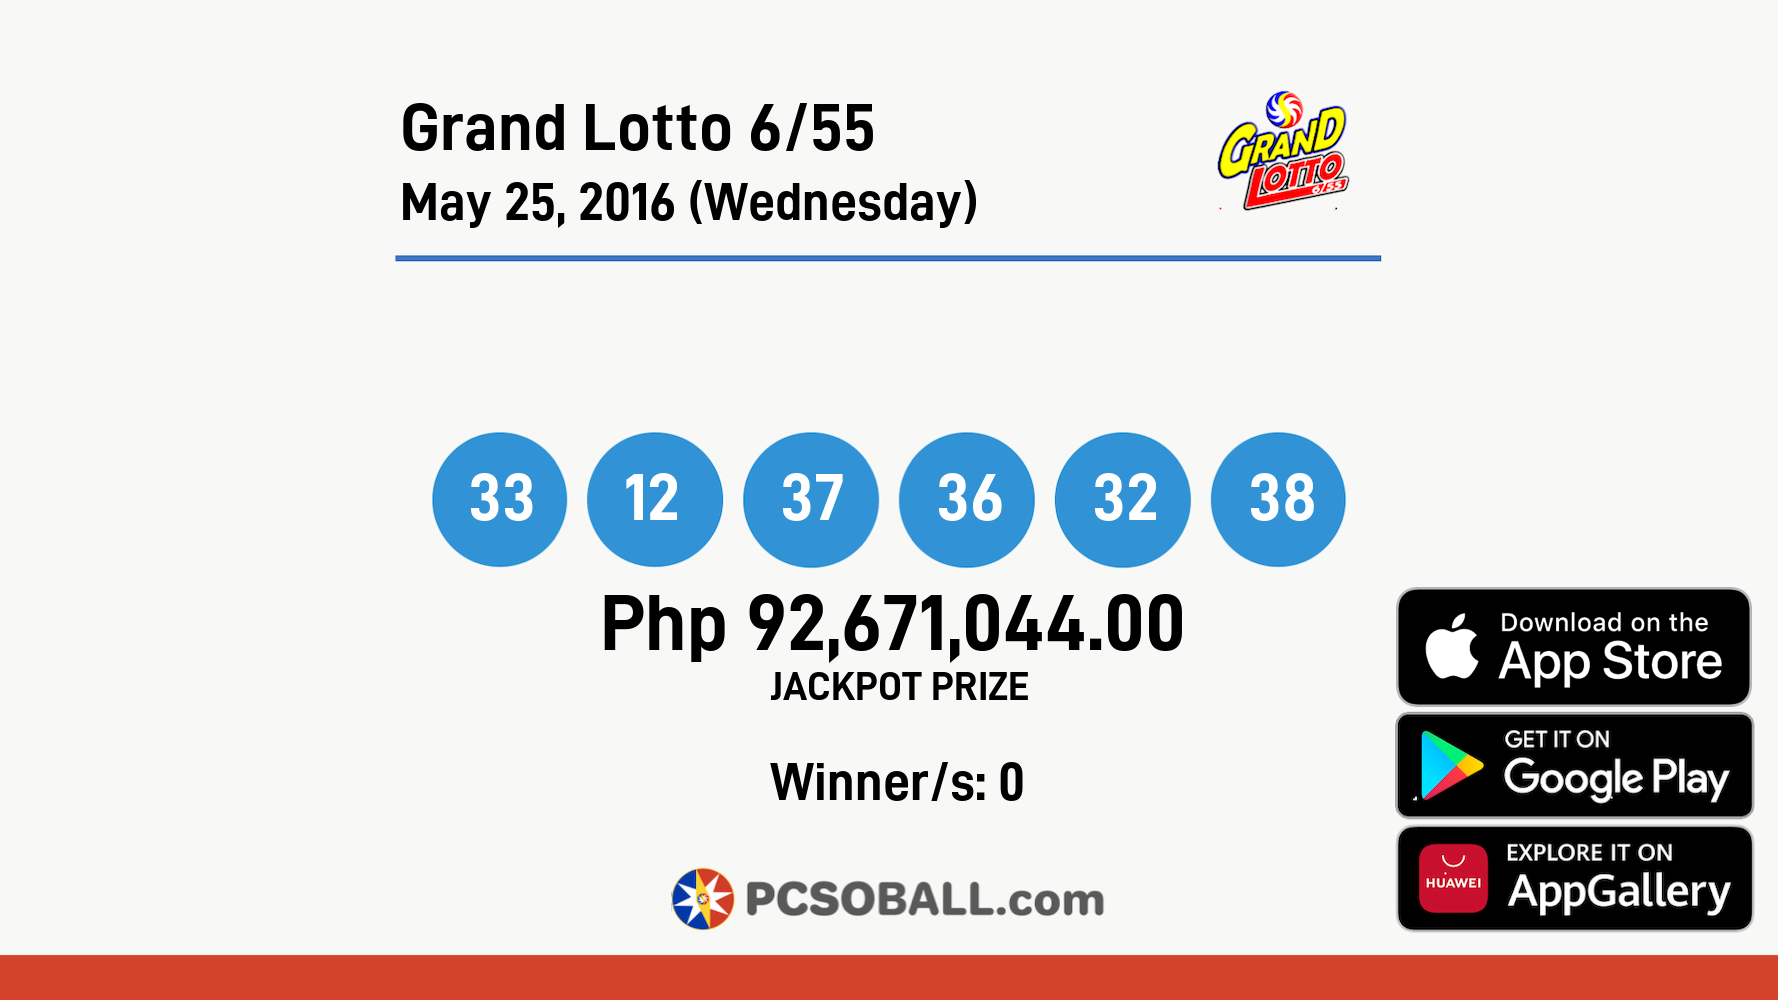 Grand Lotto 6/55 May 25, 2016 (Wednesday) Result